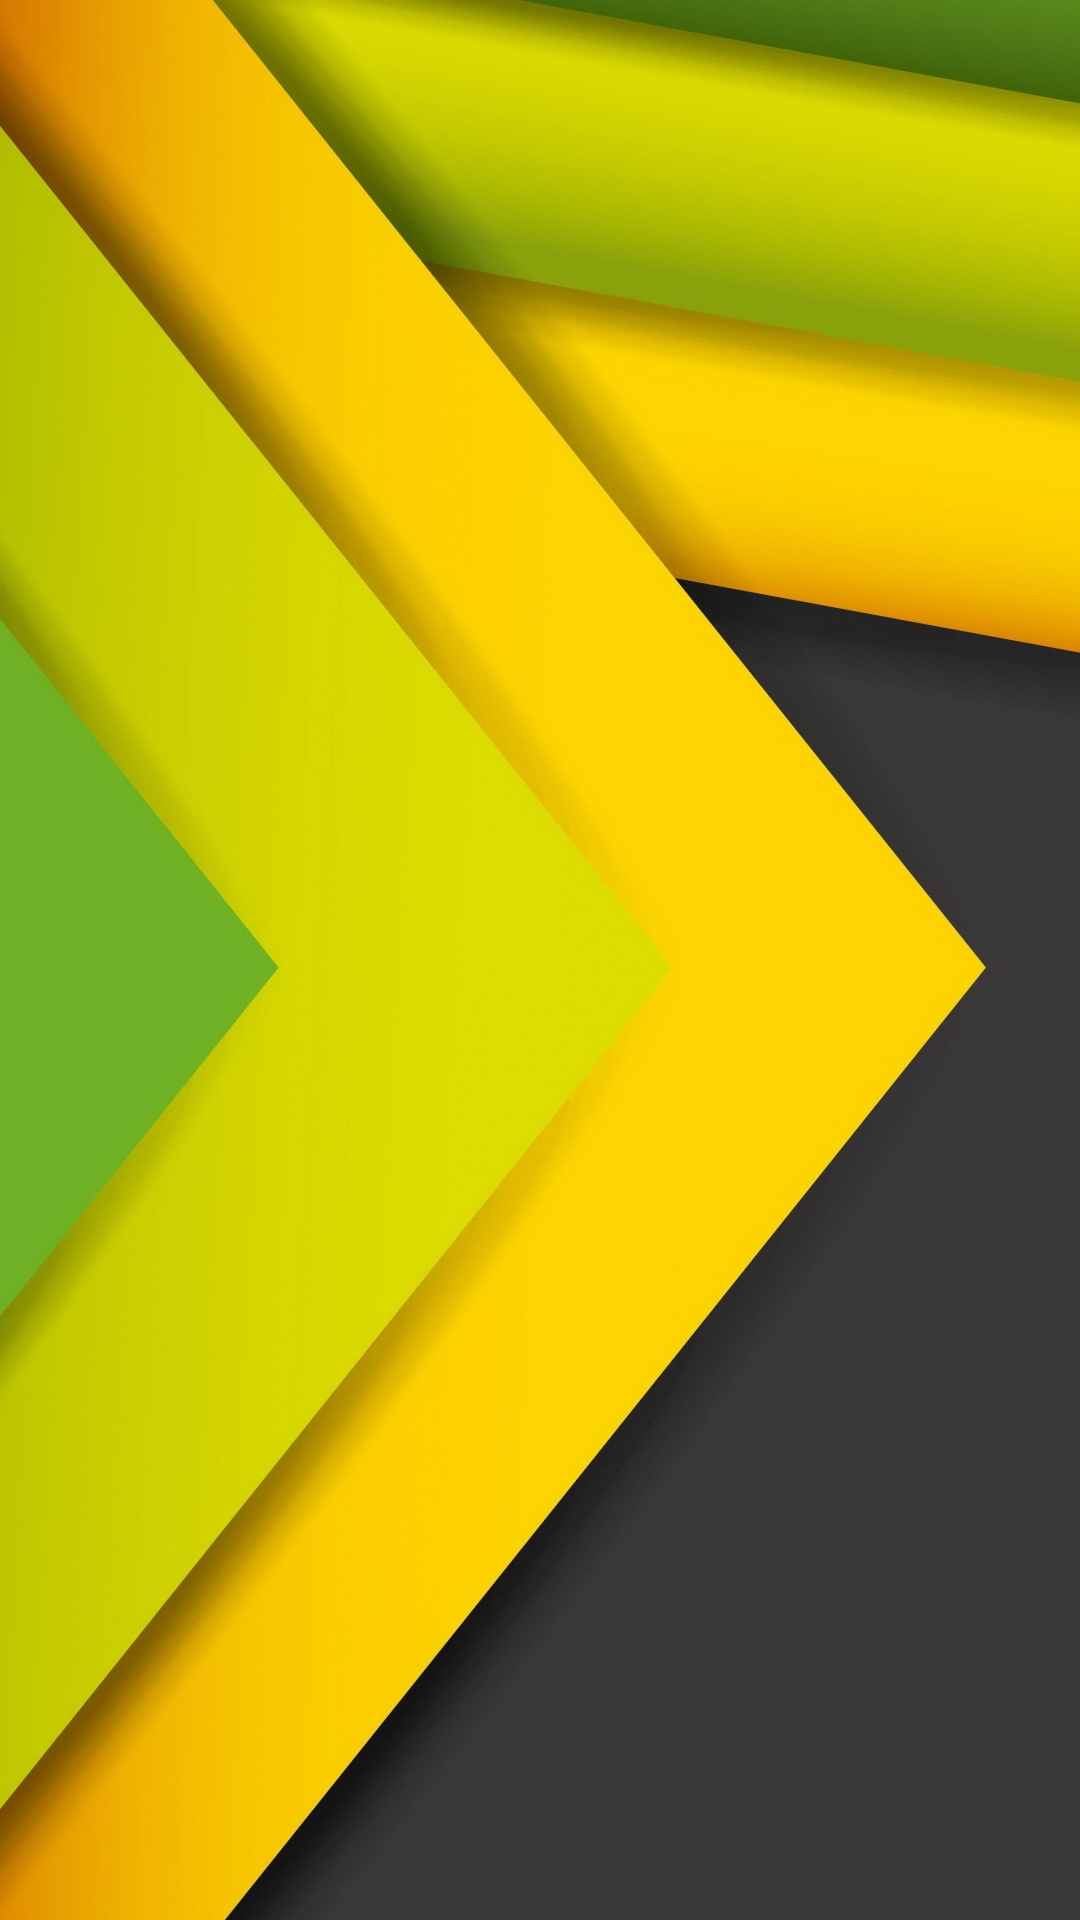 Yellow and Green Triangle Illustration. Wallpaper in 1080x1920 Resolution